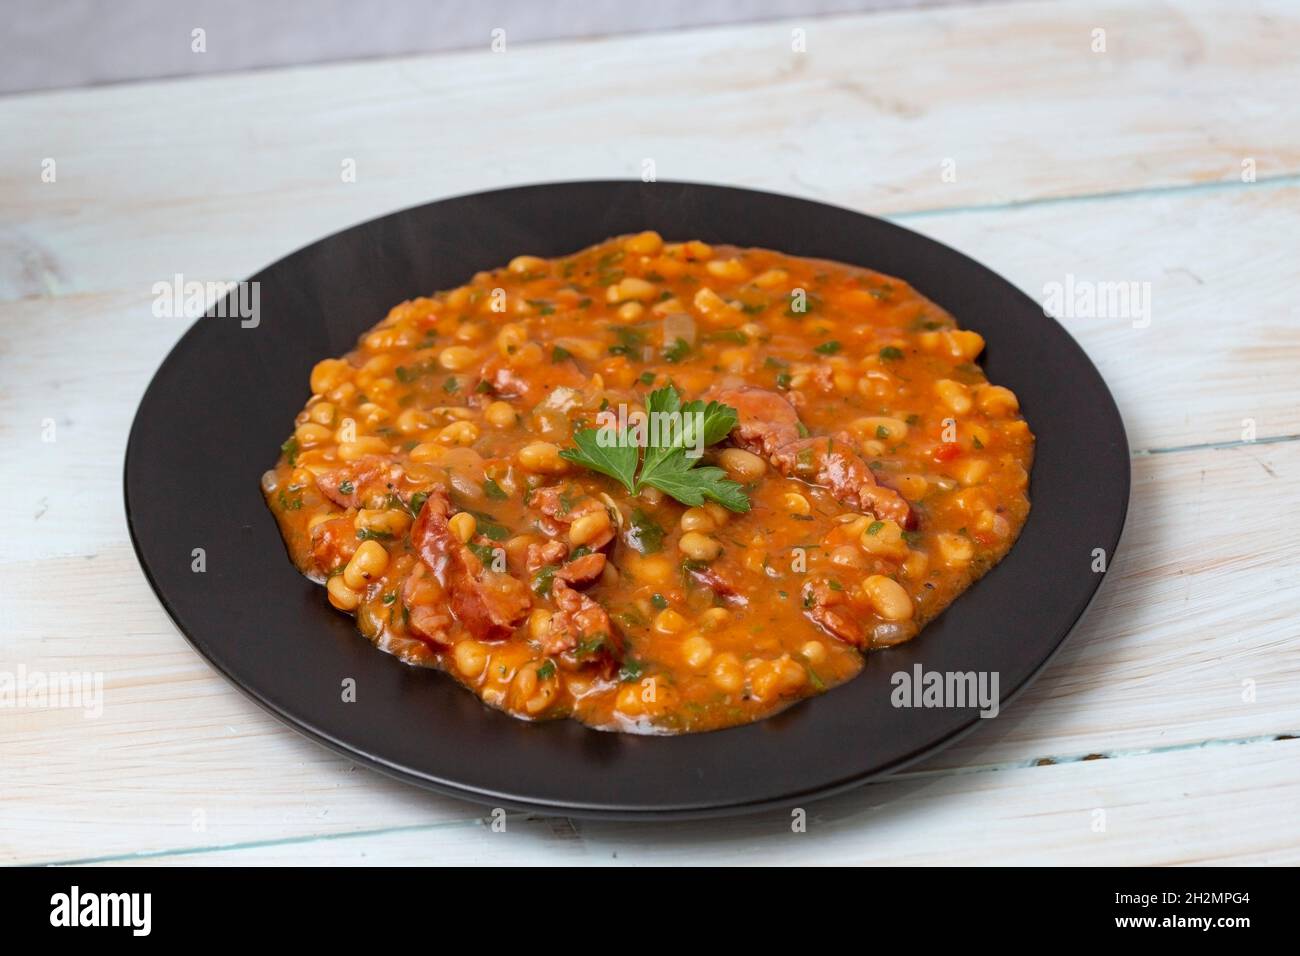 Beans with sausages on a black ceramic plate Stock Photo